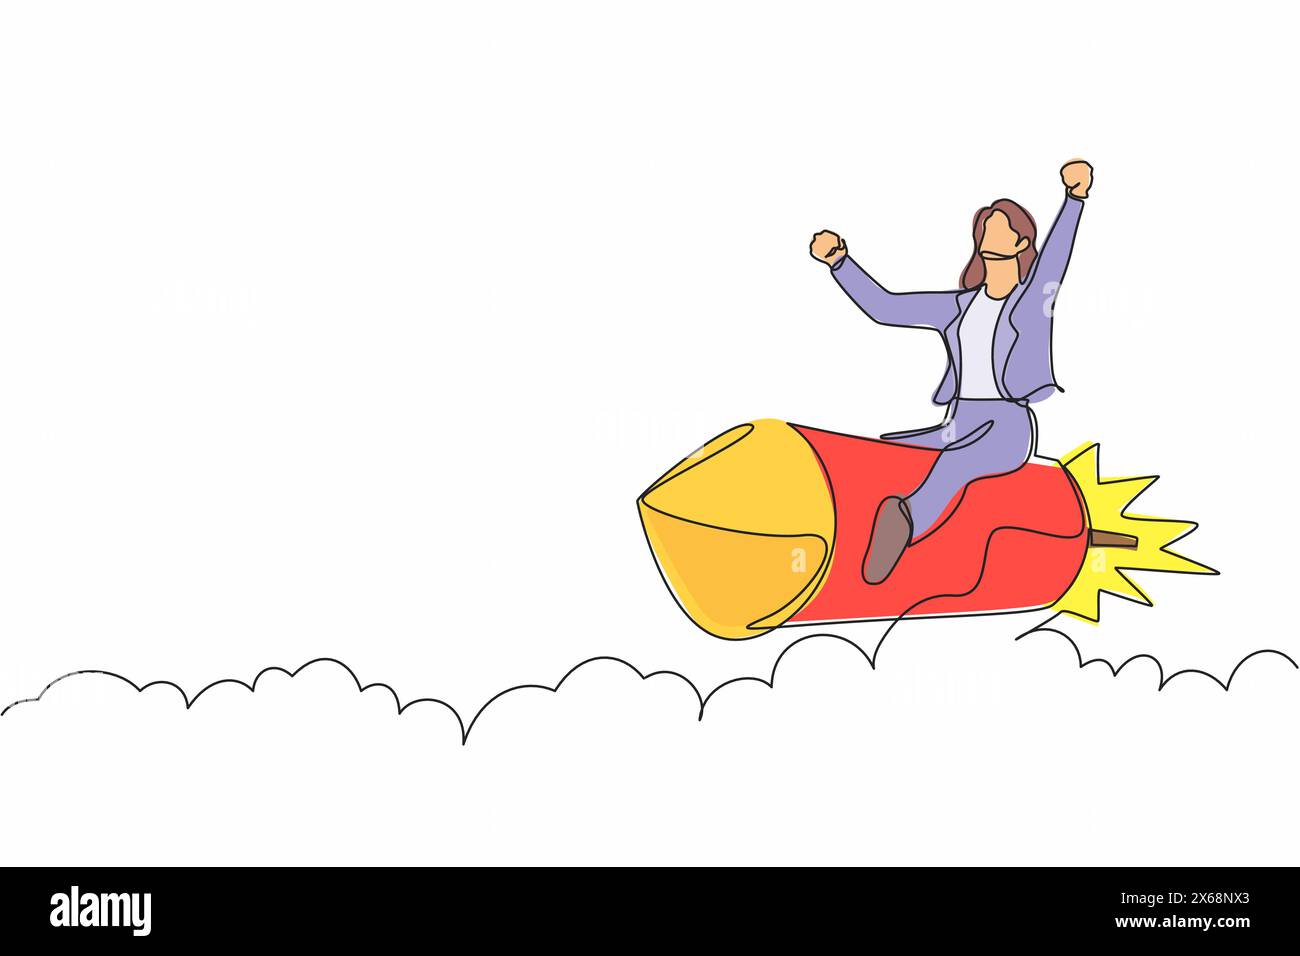 Single continuous line drawing businesswoman riding a rocket through the sky, concept for business success or innovation. Minimalist metaphor. Dynamic Stock Vector